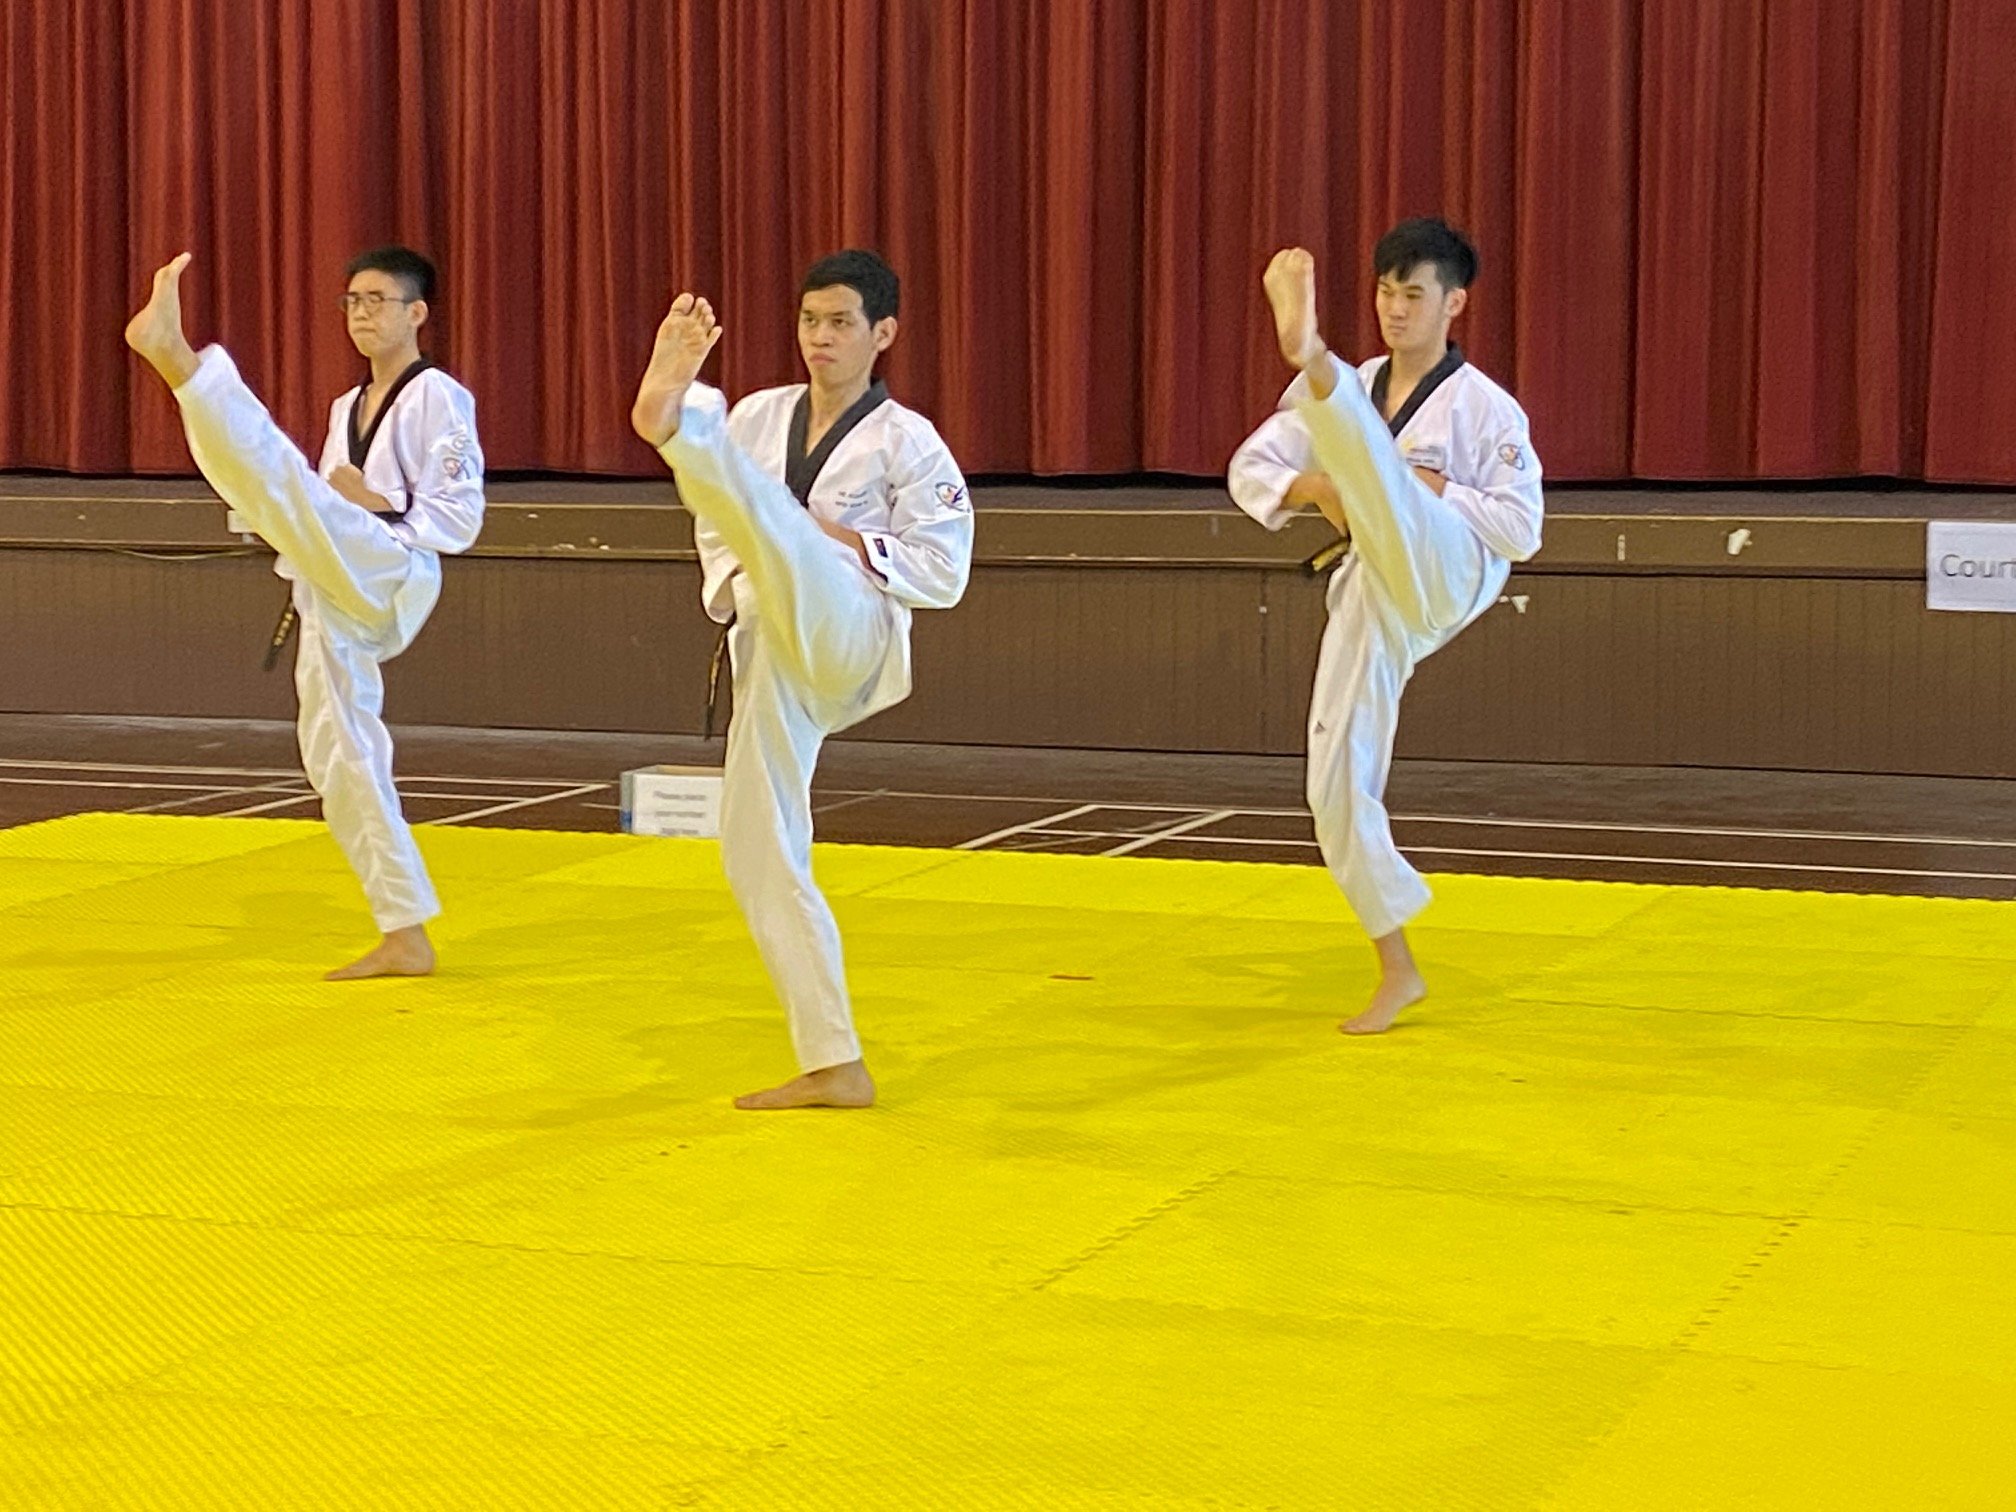 NSG Taekwondo : Punches, kicks and shouts as TKD athletes perform their best routines on camera!